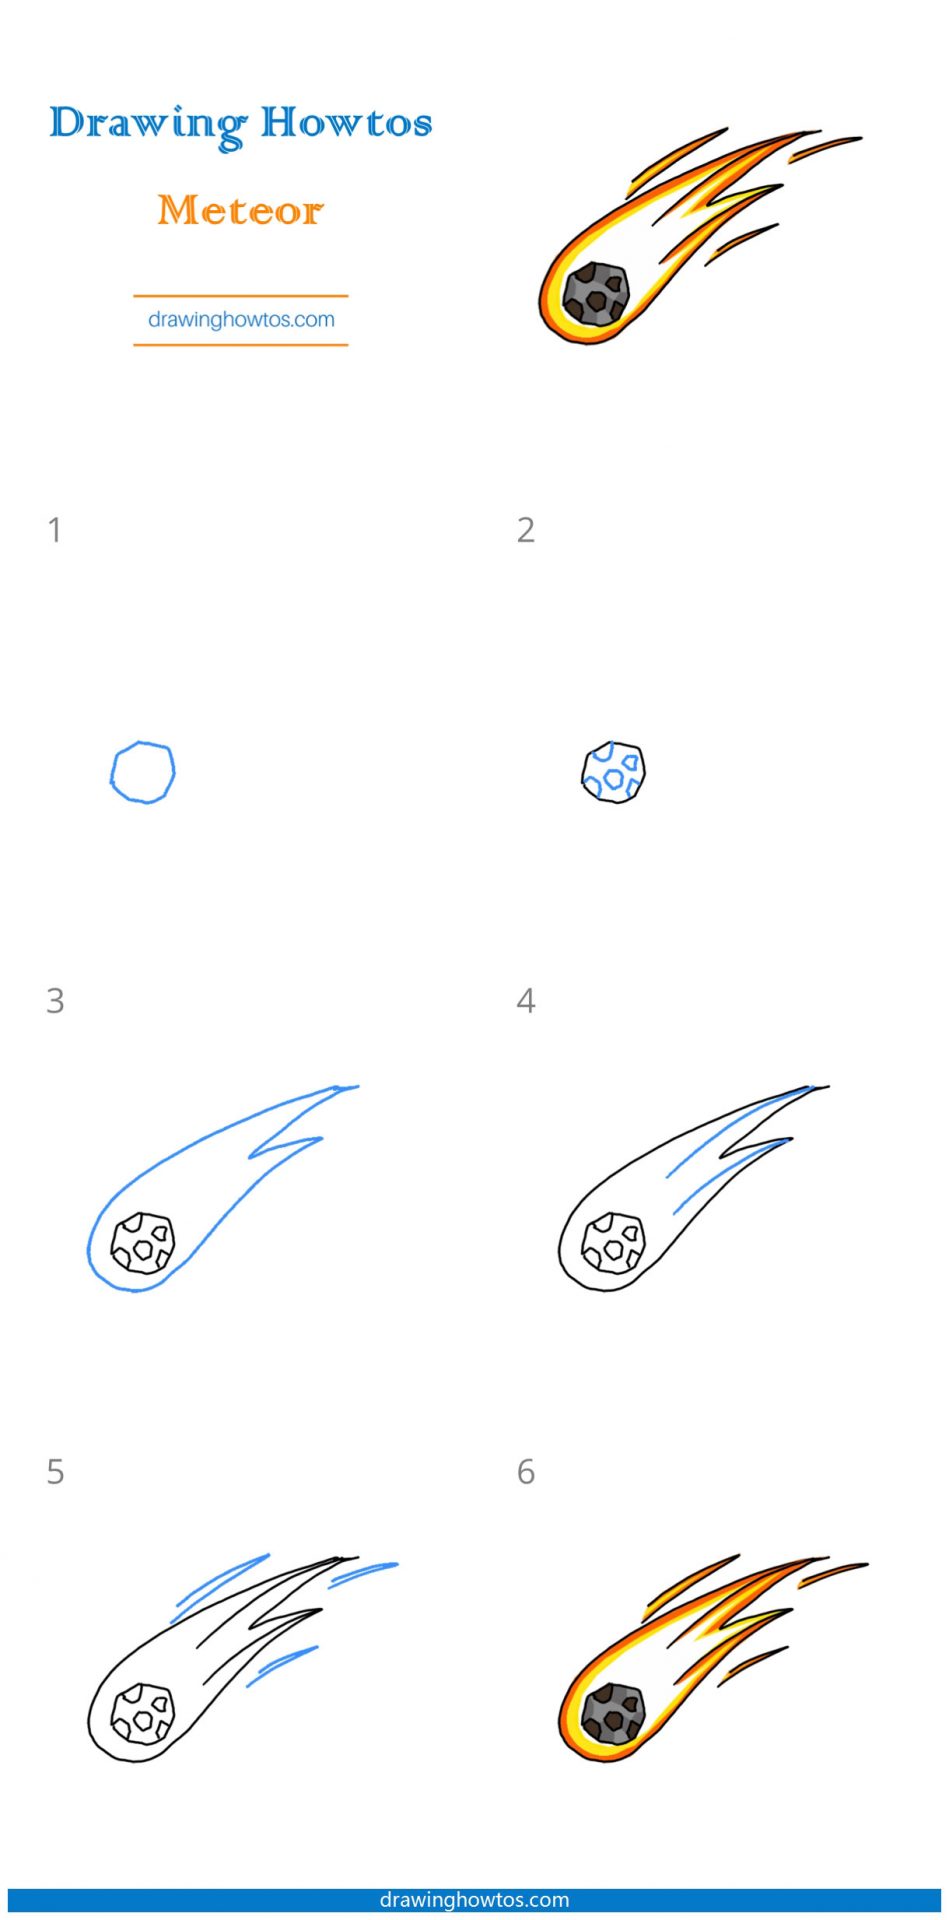 How to Draw a Meteor Step by Step